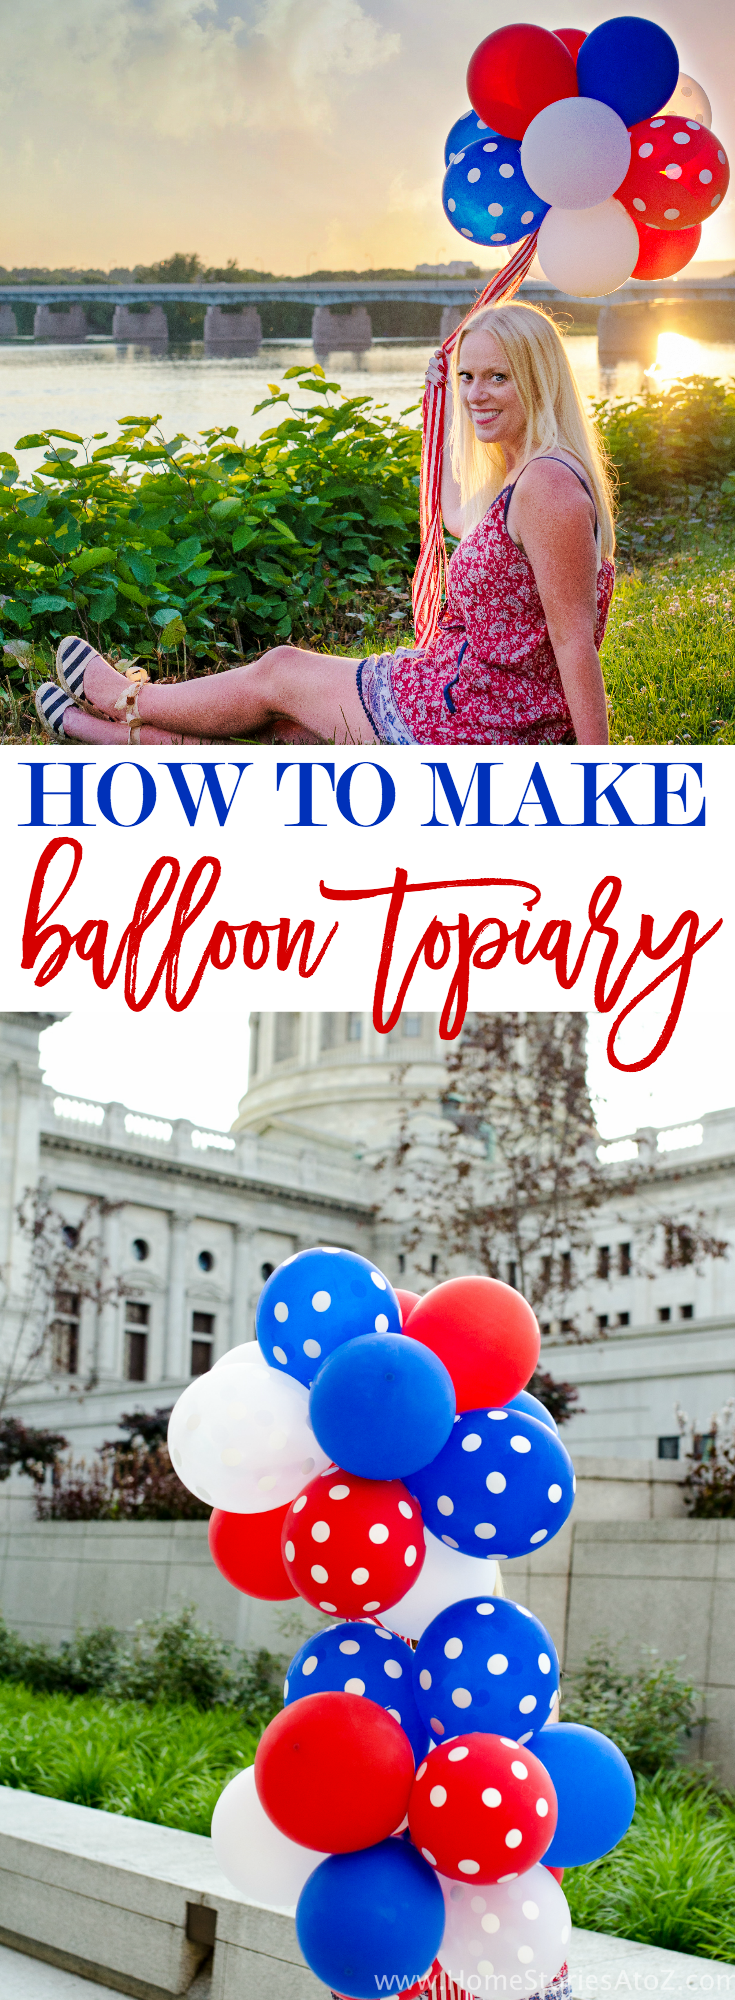 How to Make a Balloon Topiary Tutorial with video